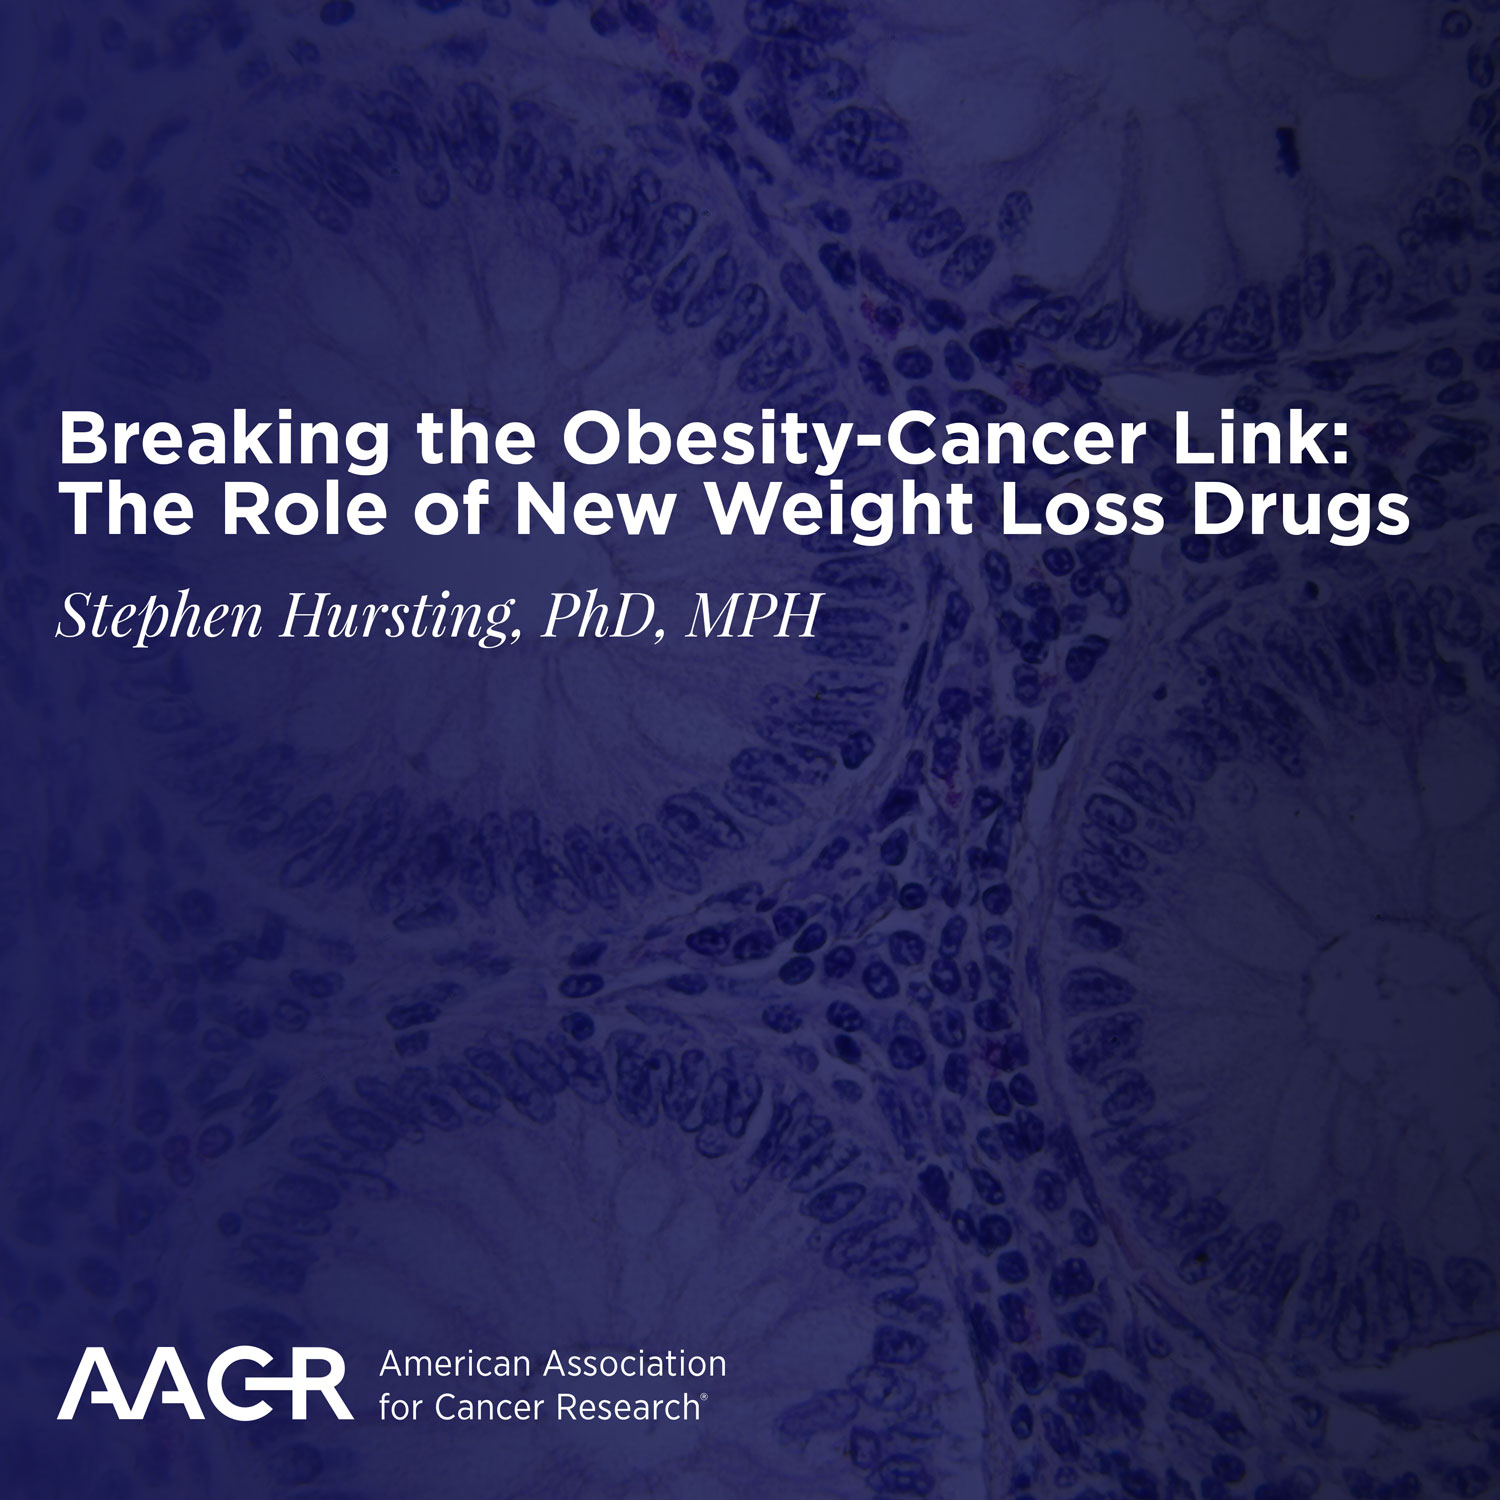 Annual American Association of Cancer Research (AACR) Special Session Features Stephen Hursting’s Cancer and Obesity Research